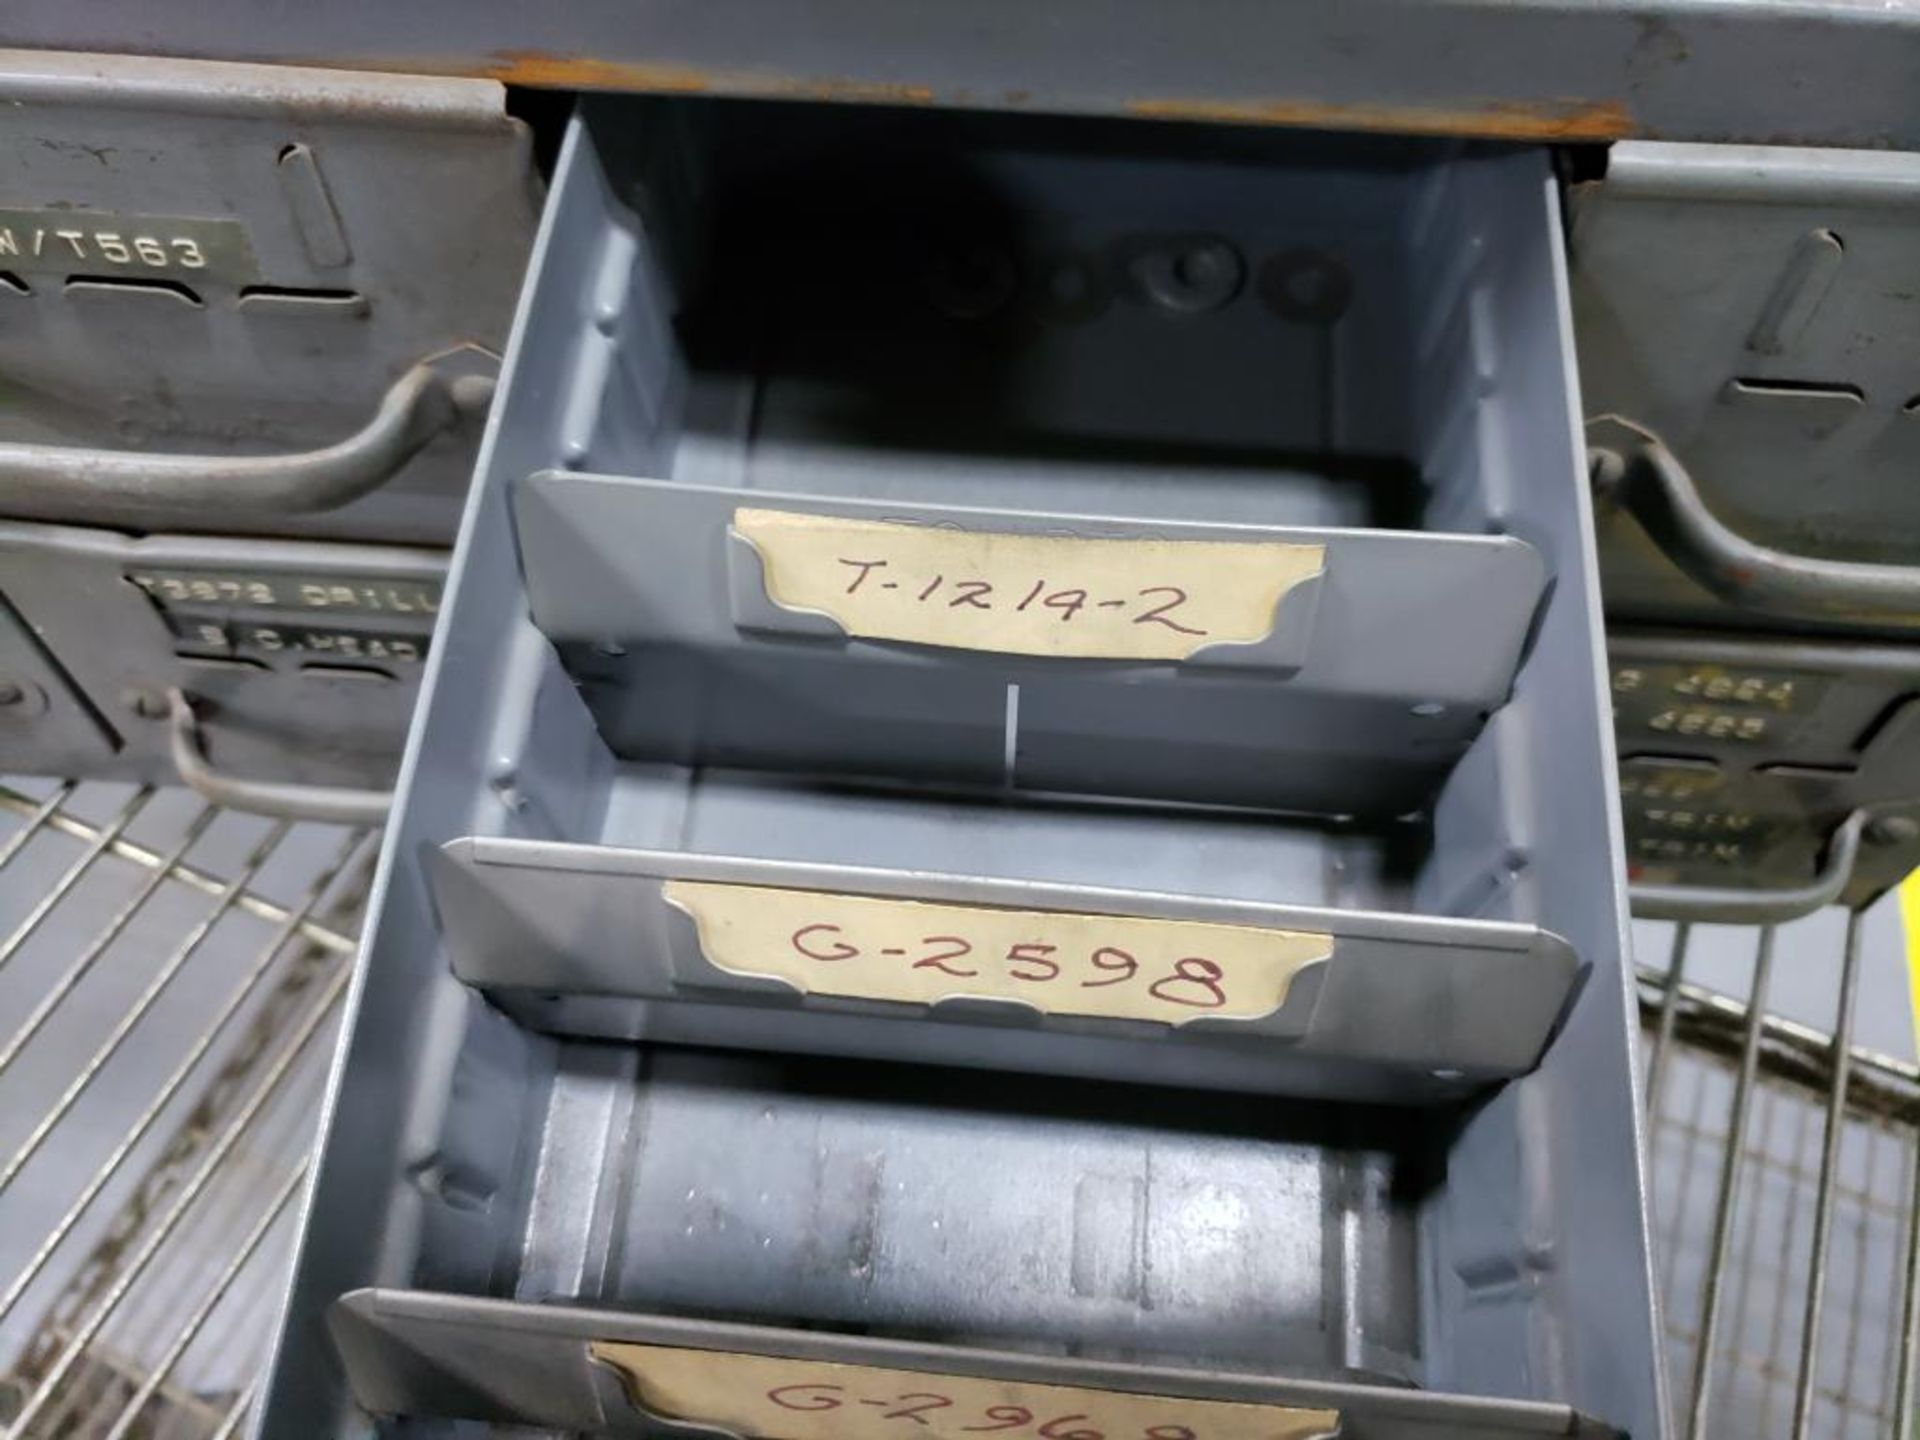 Qty 3 - Small parts storage drawers. - Image 6 of 20